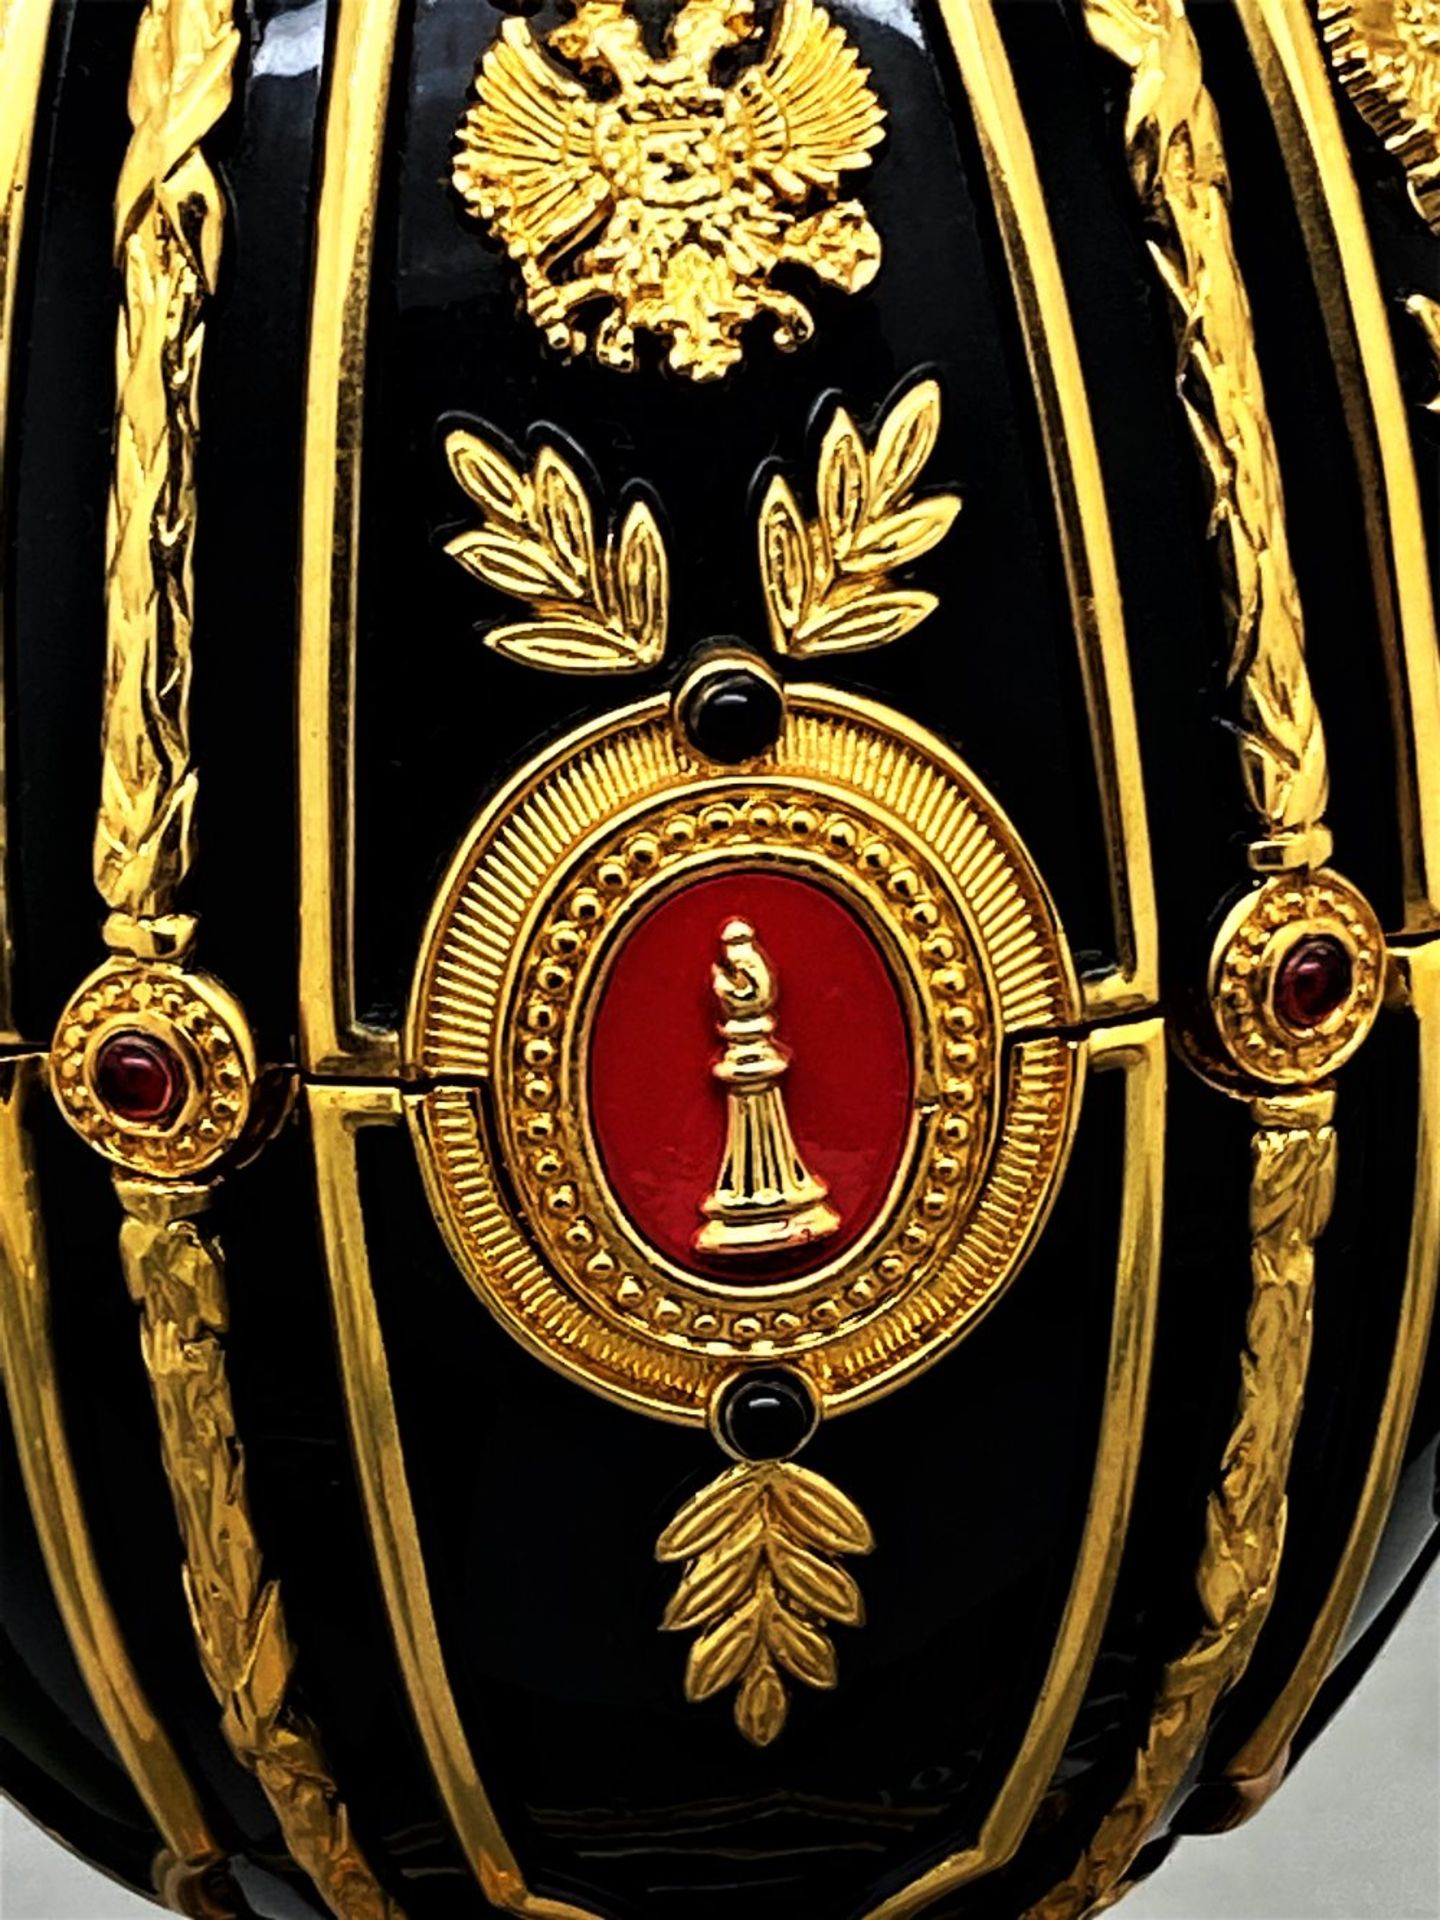 Faberge 24 Ct Gold "The Imperial Jeweled Egg Chess Set" - Image 4 of 6